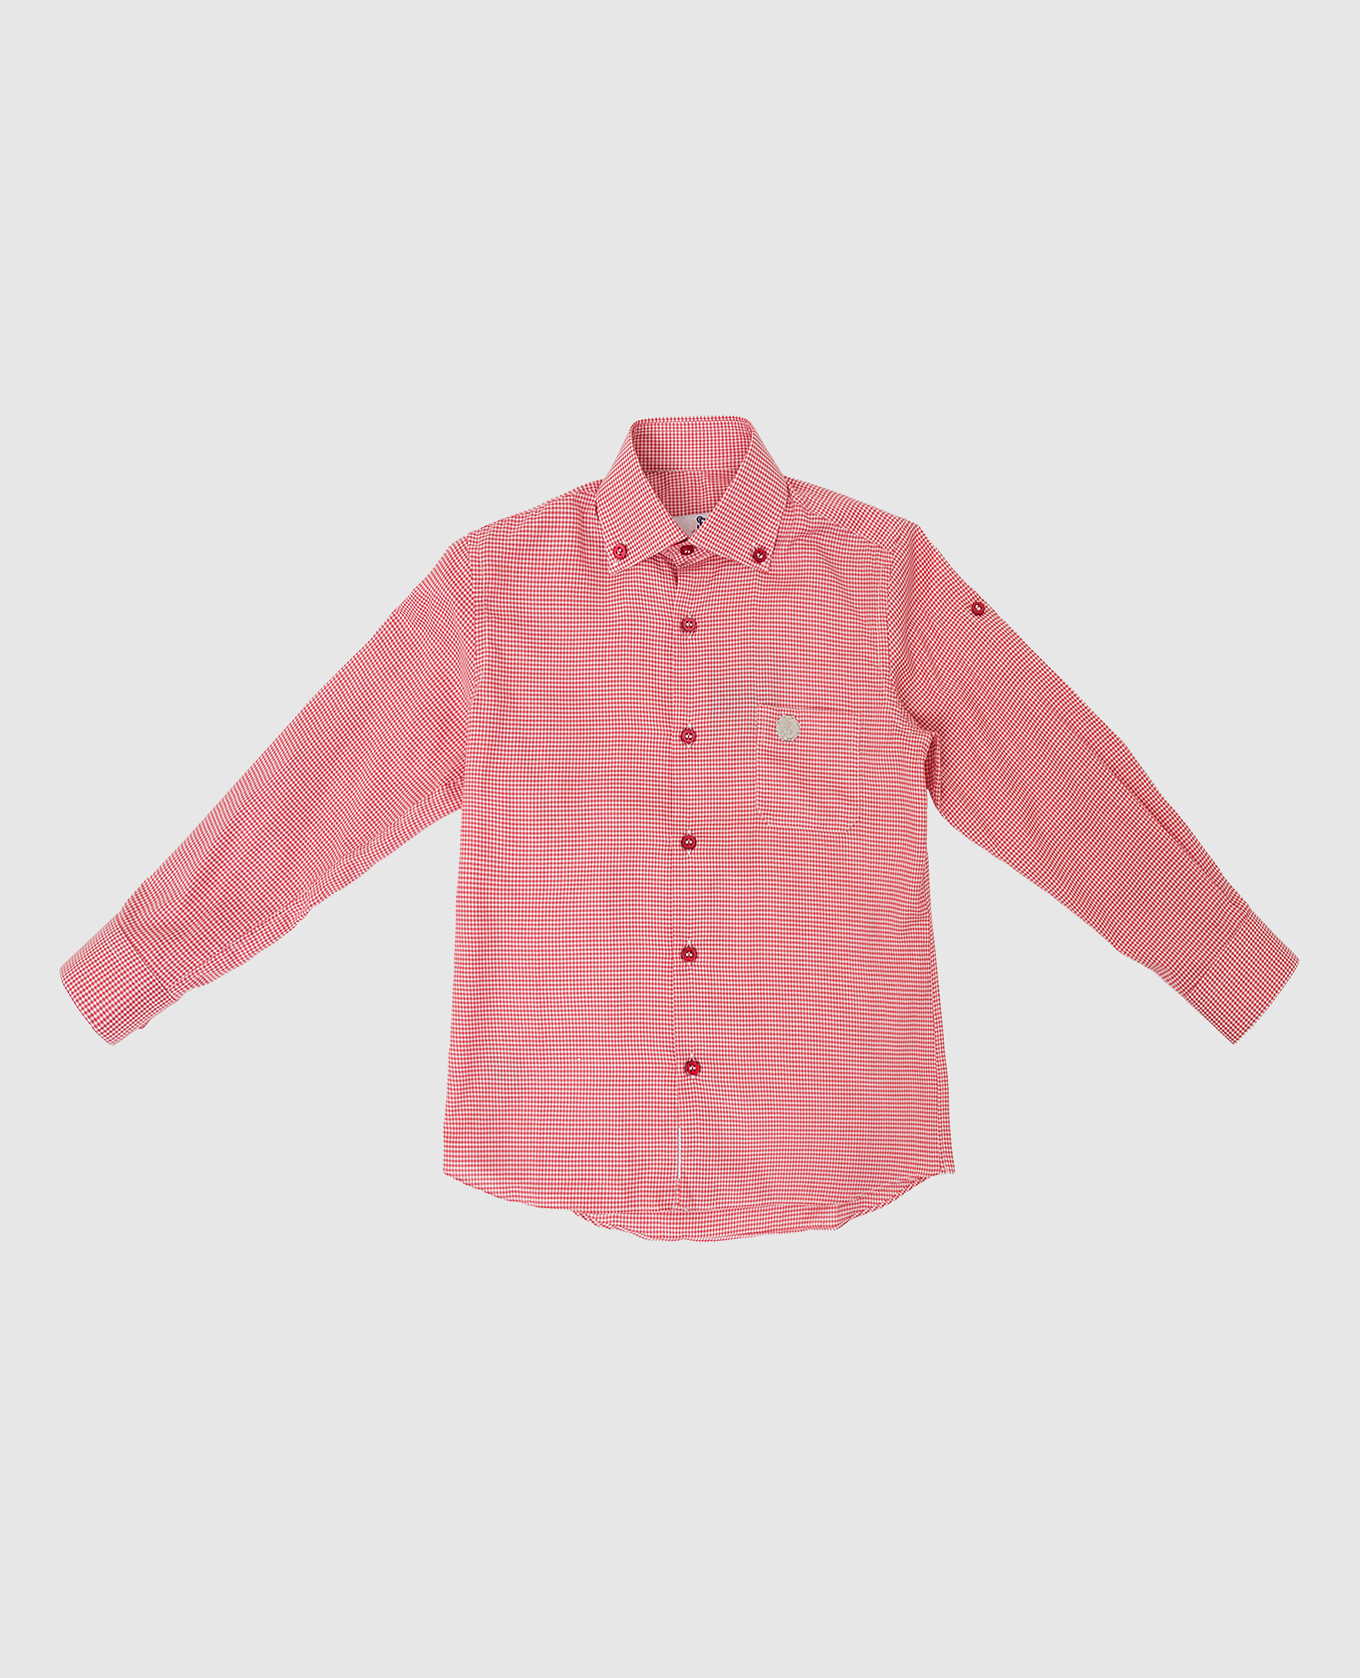 Children's red shirt in a pattern